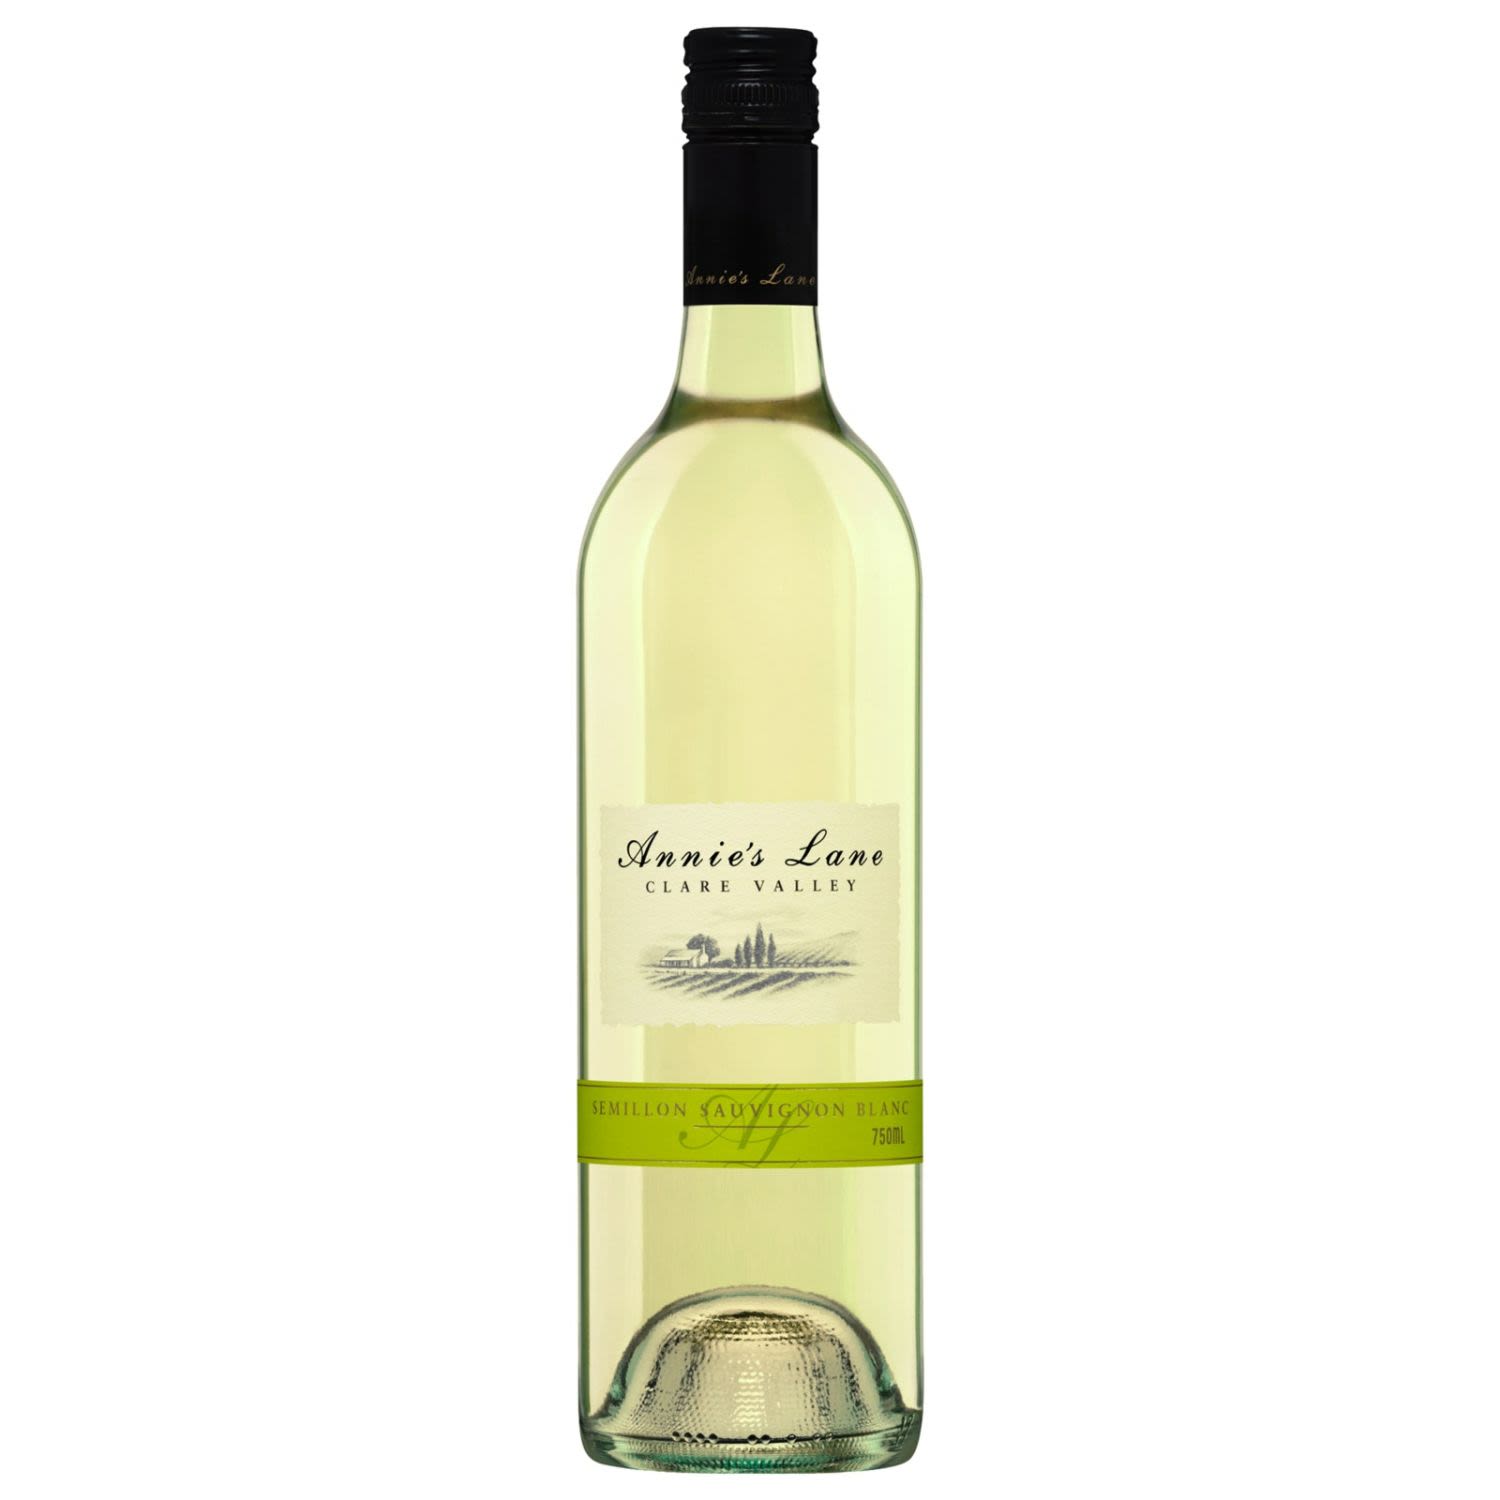 Freshly cut hay, attractive floral notes & hints of lemon & lychee excite the nose. The palate brims with green melon & tropical fruit flavours. A fine delicate wine that is drinking perfectly now.<br /> <br />Alcohol Volume: 12.50%<br /><br />Pack Format: 6 Pack<br /><br />Standard Drinks: 7.4</br /><br />Pack Type: Bottle<br /><br />Country of Origin: Australia<br /><br />Region: Clare Valley<br /><br />Vintage: Vintages Vary<br />